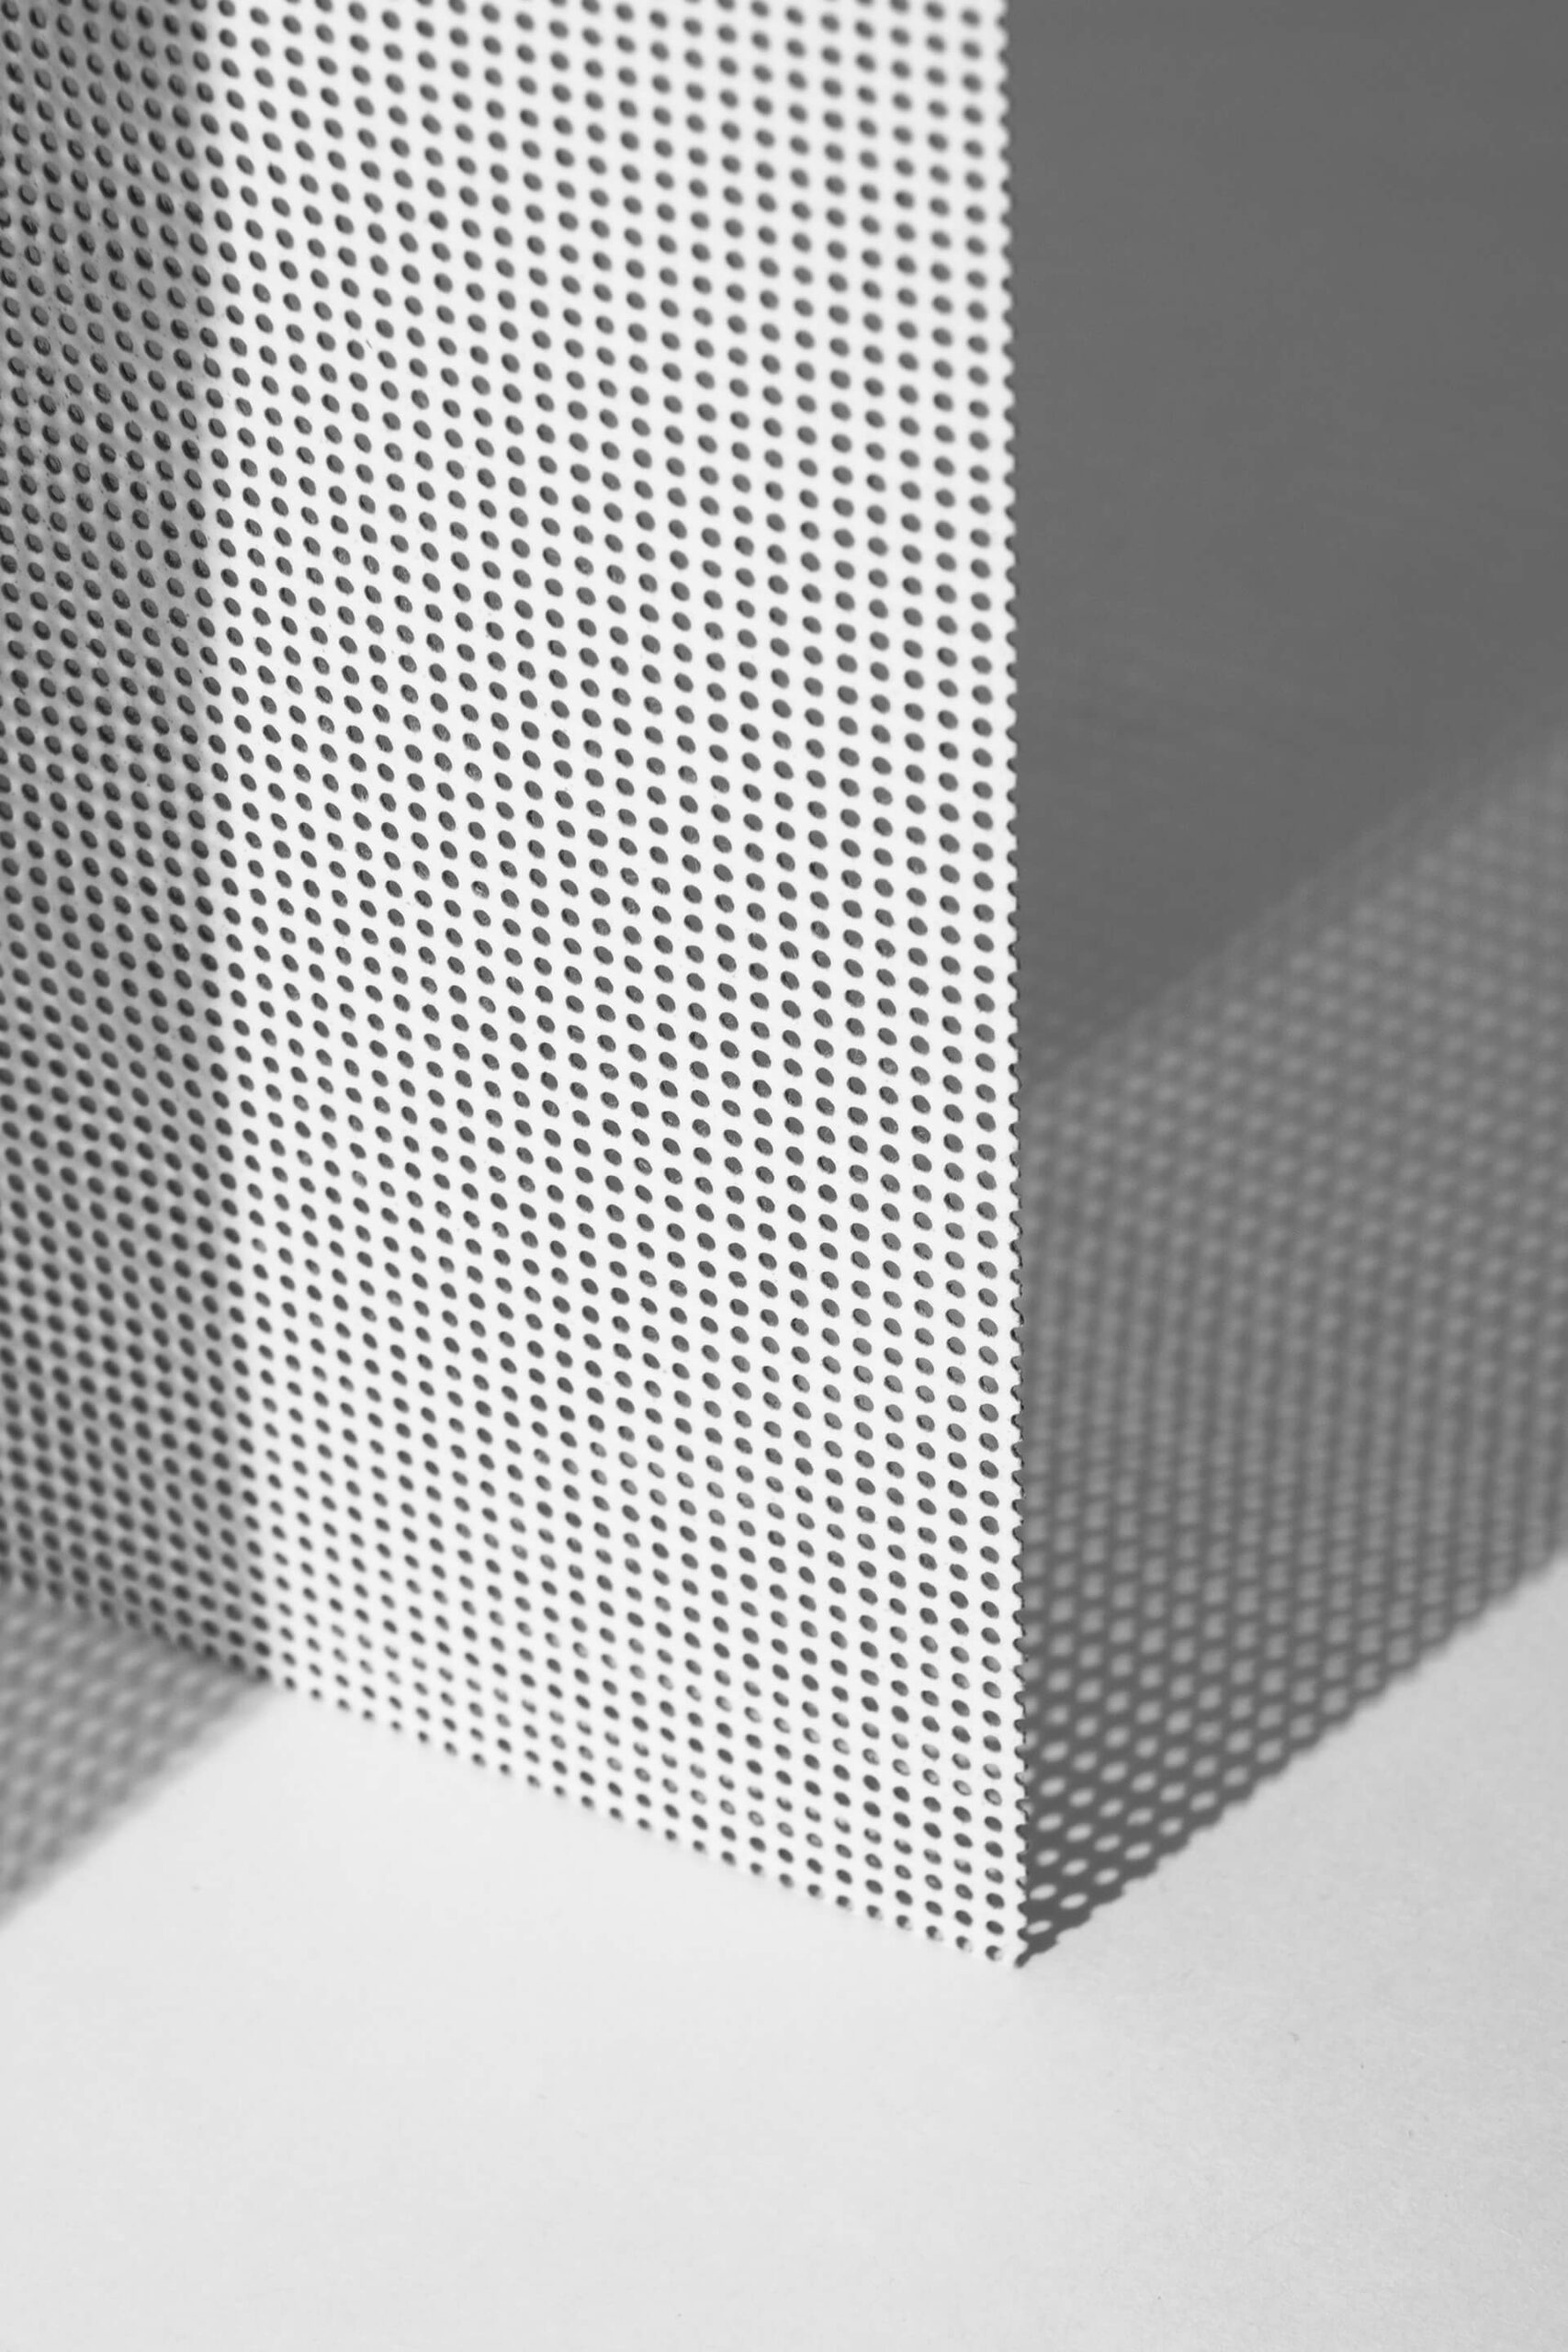 microperforated-sheet-background-still-life